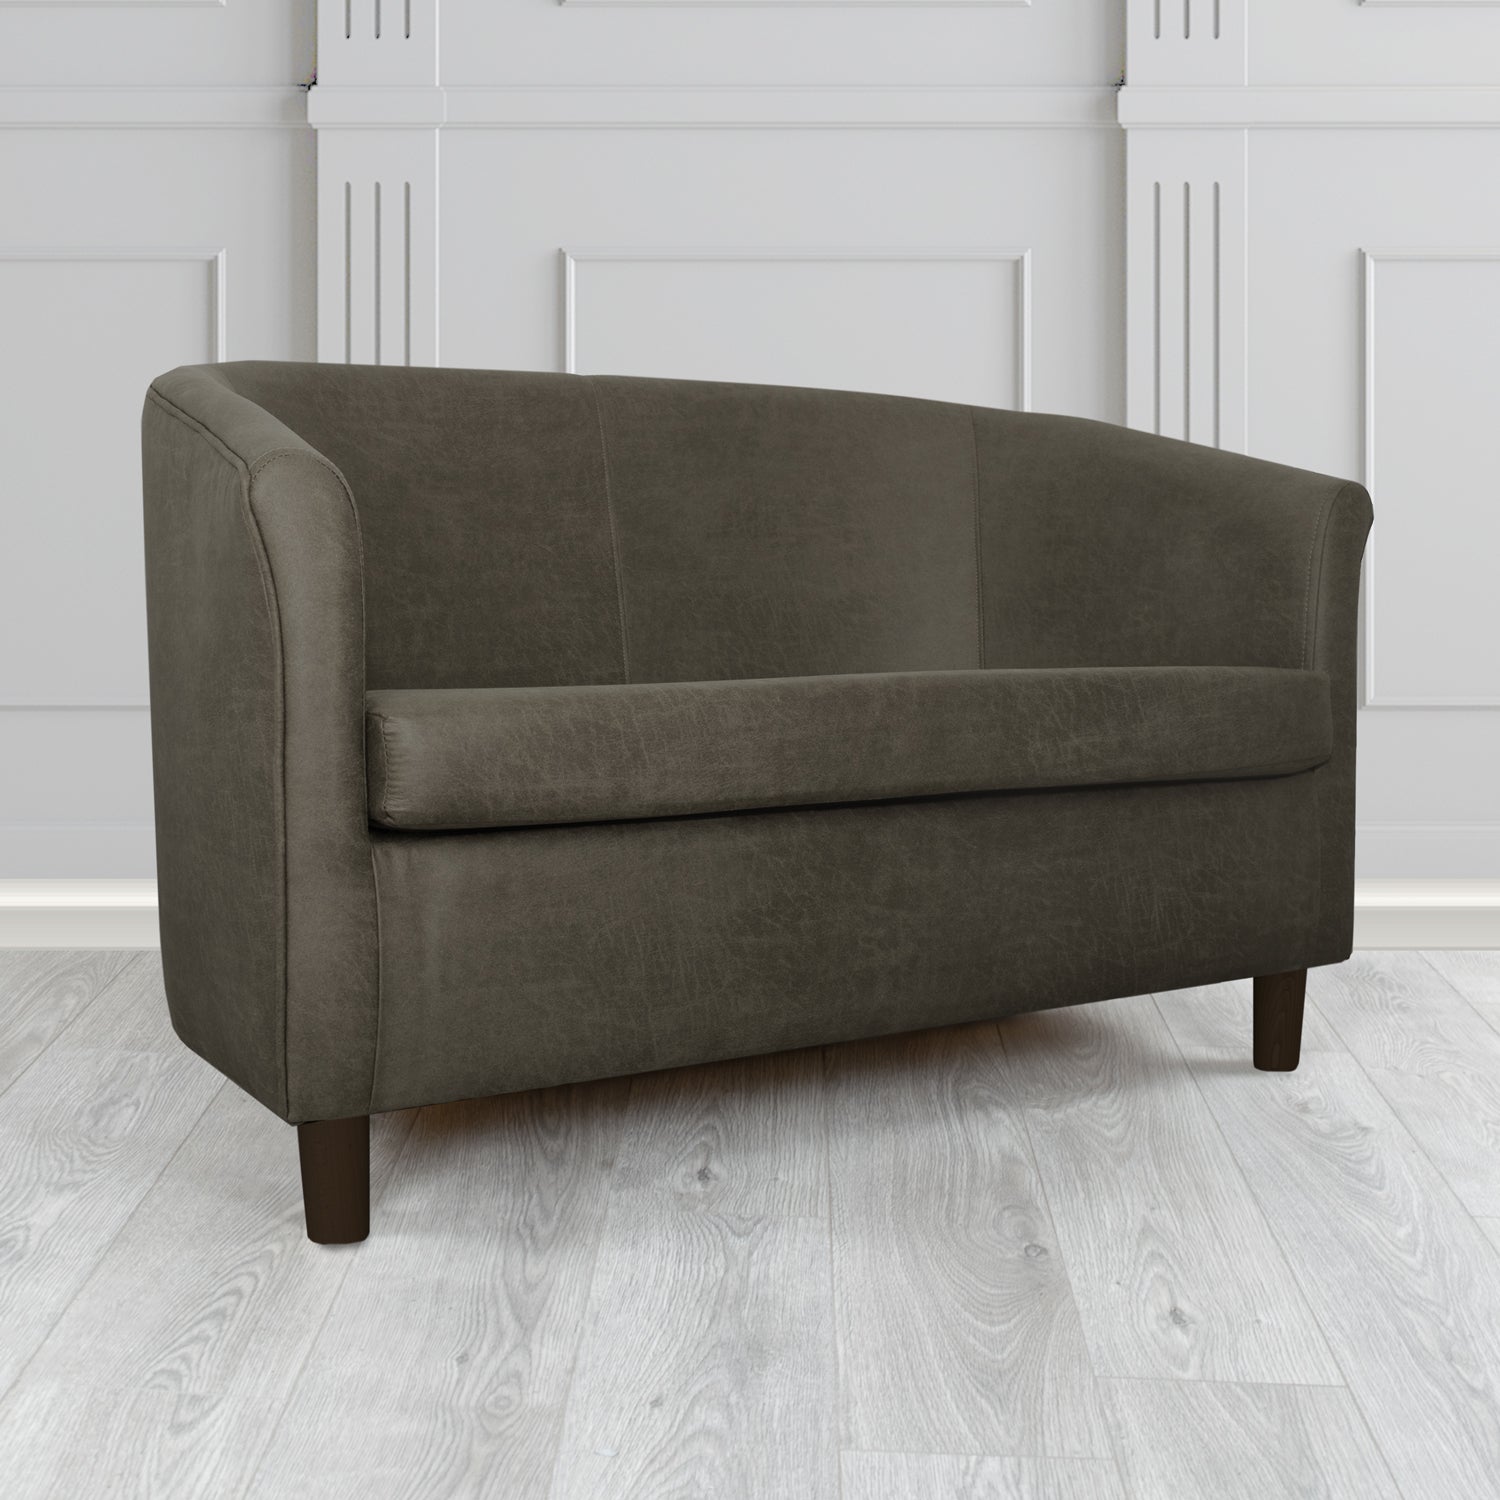 Tuscany 2 Seater Tub Sofa in Nevada Charcoal Faux Leather - The Tub Chair Shop